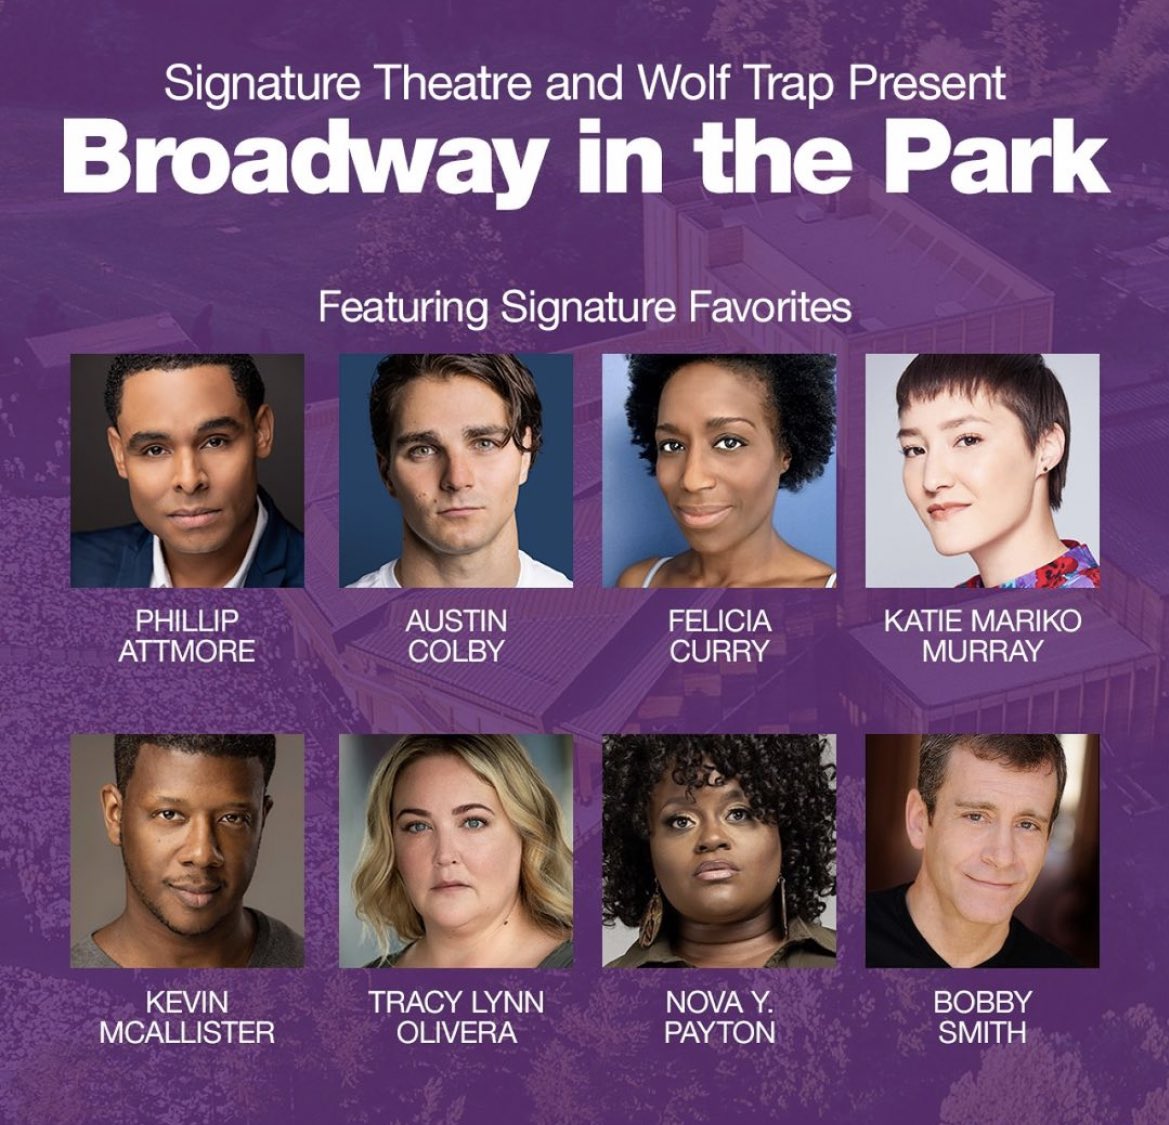 Broadway In The Park is back!
Experience a night of stellar show tunes under the stars June 16th at 8pm at Wolf Trap. Broadway stars @Meganhilty and @MsLeaSalonga join some of Signature Theatre's favorite performers for a night of musical theater.

📸 @sigtheatre